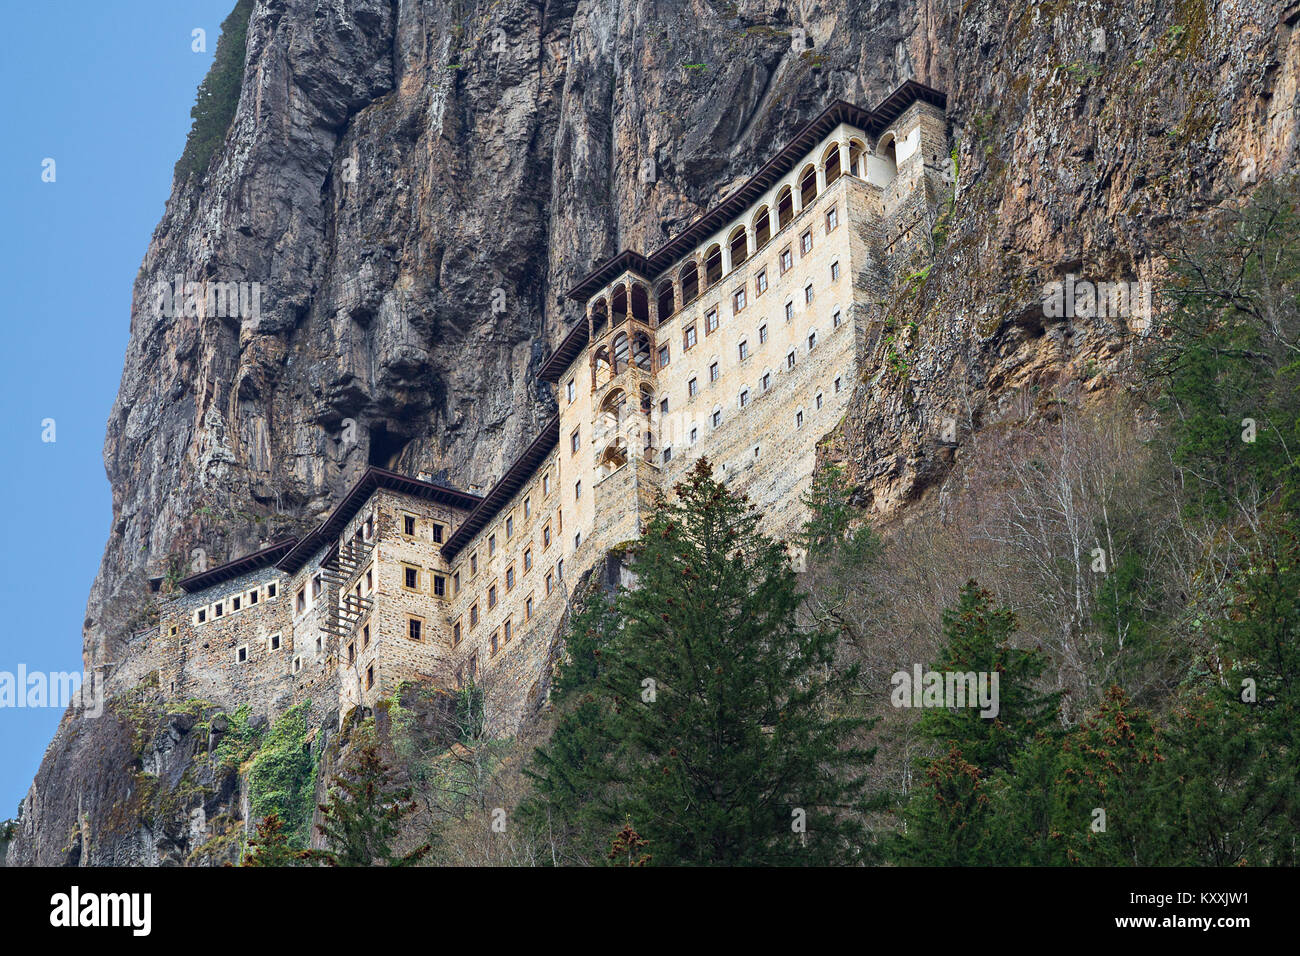 Sumela Monastery in Trabzon, Turkey. Greek Orthodox Monastery of Sumela was founded in the 4th century. Stock Photo